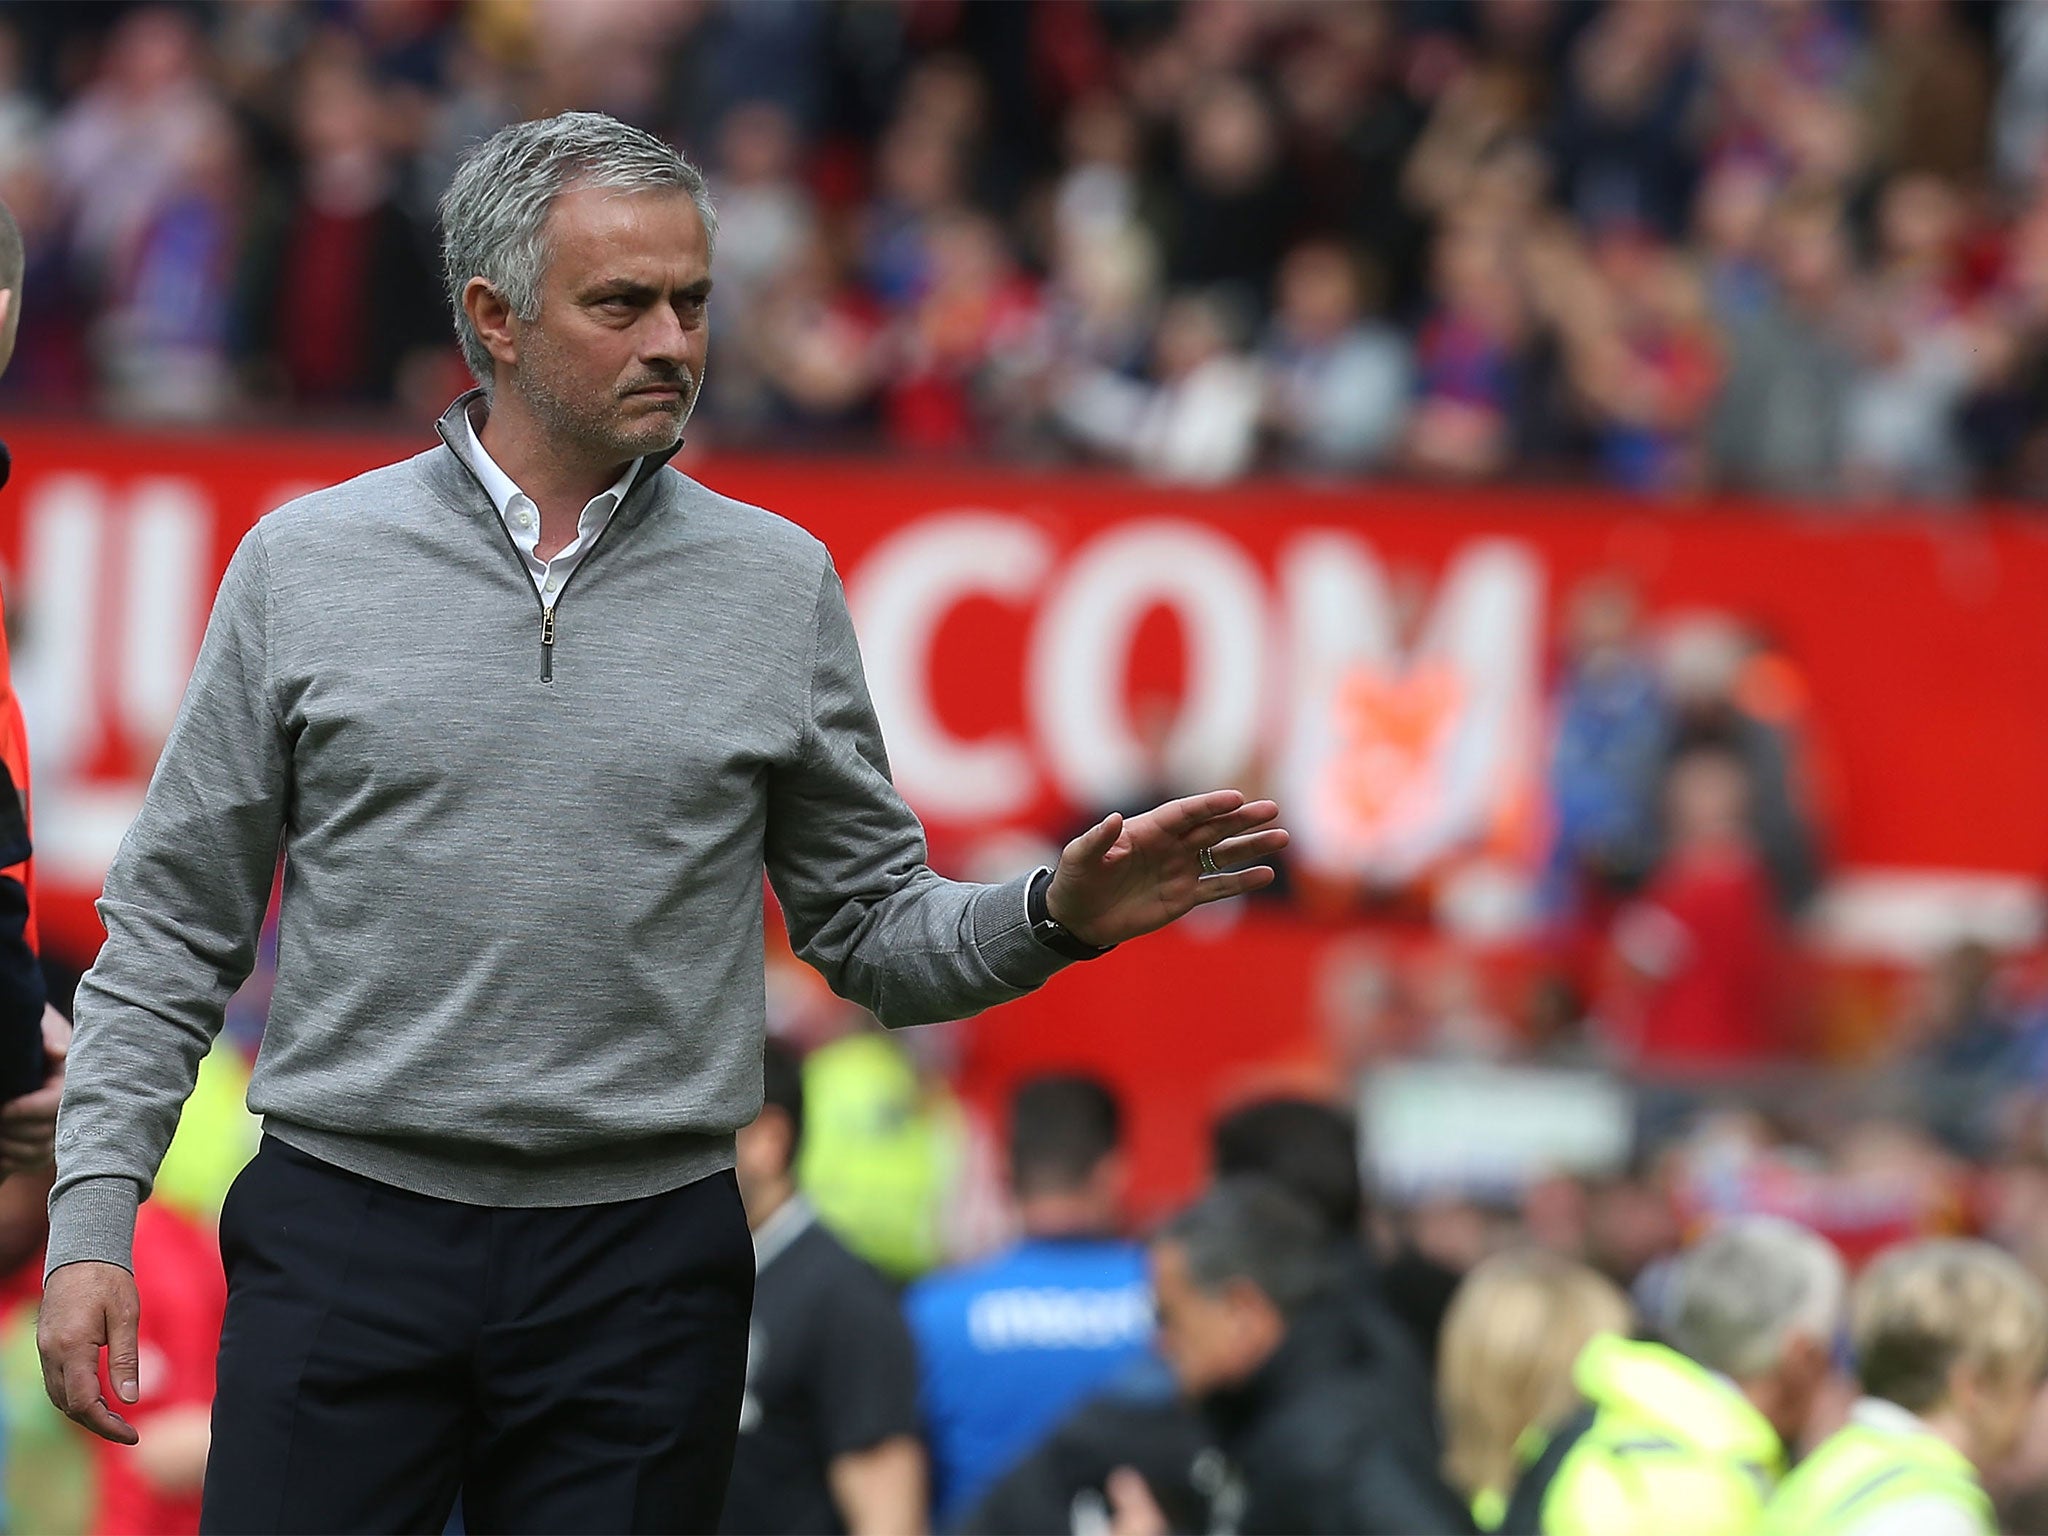 Jose Mourinho was in no mood for talking despite a win over Palace